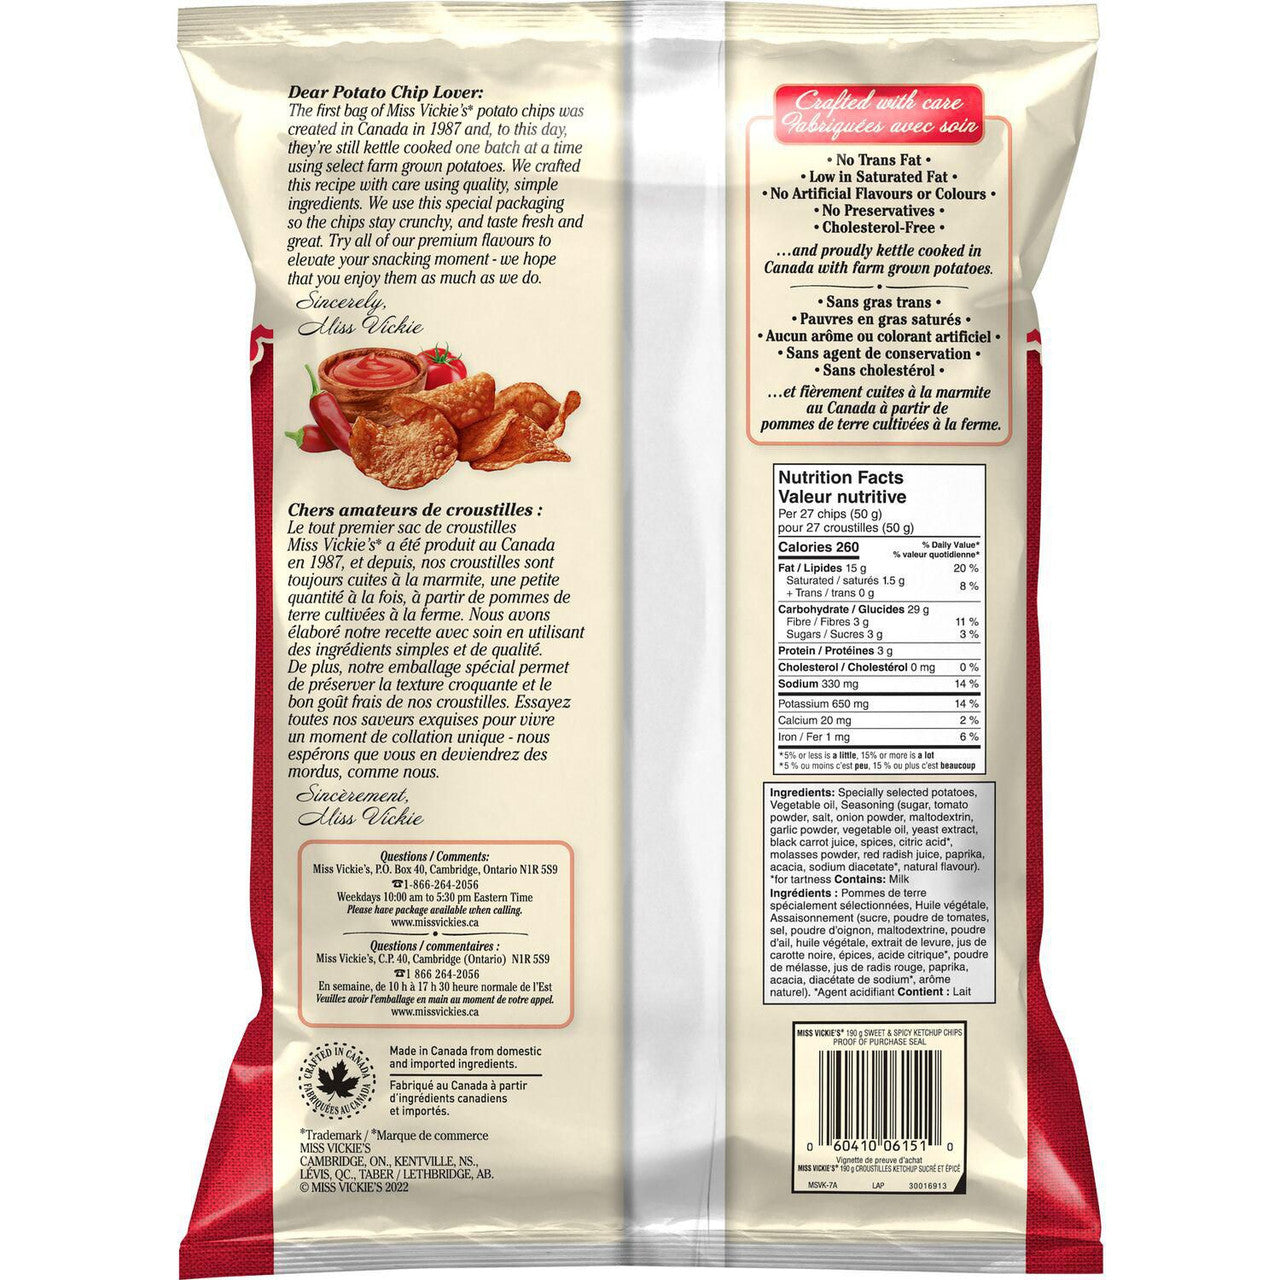 Miss Vickie's Kettle Cooked Sweet & Spicy Ketchup Potato Chips 40ct x 40g/1.4 oz. {Imported from Canada}